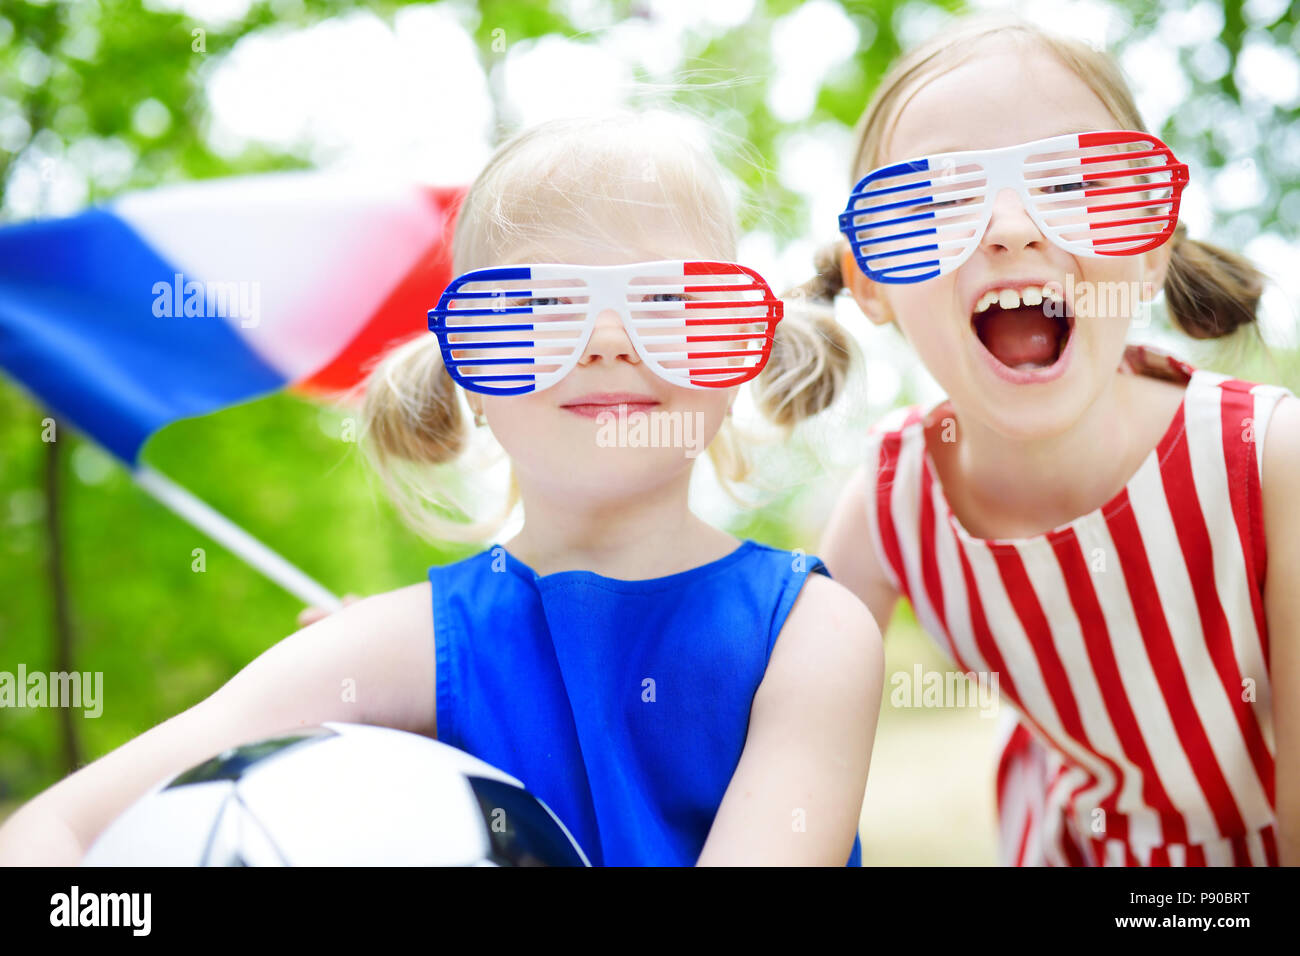 Two adorable little soccer fans cheering on summer day Stock Photo